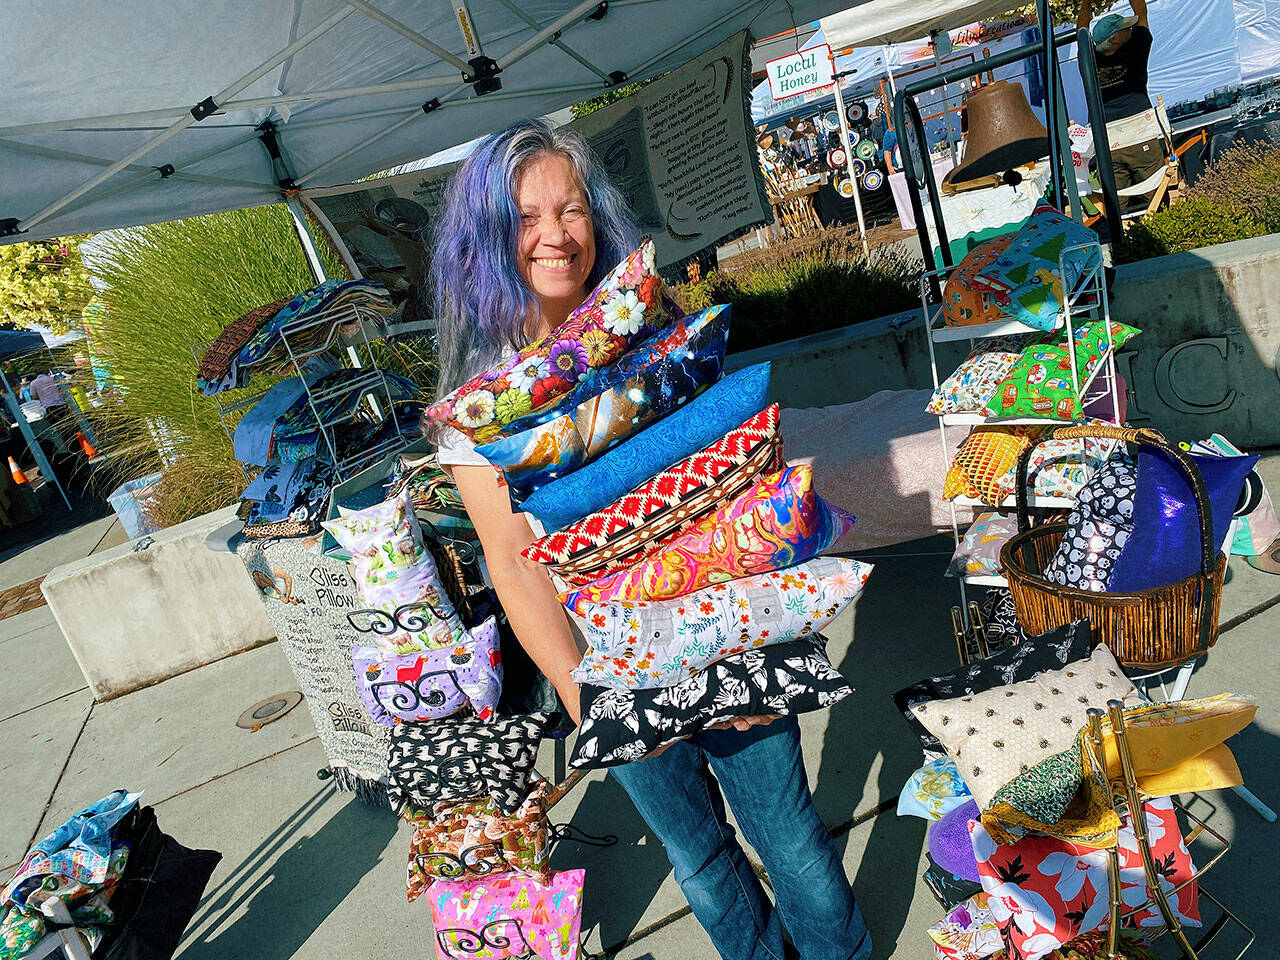 KarenLynn Robinson displays some of the BlissPillows she offers at her booth at the Sequim Farmers & Artisans Market Saturday. Photo by Emma Jane “EJ” Garcia